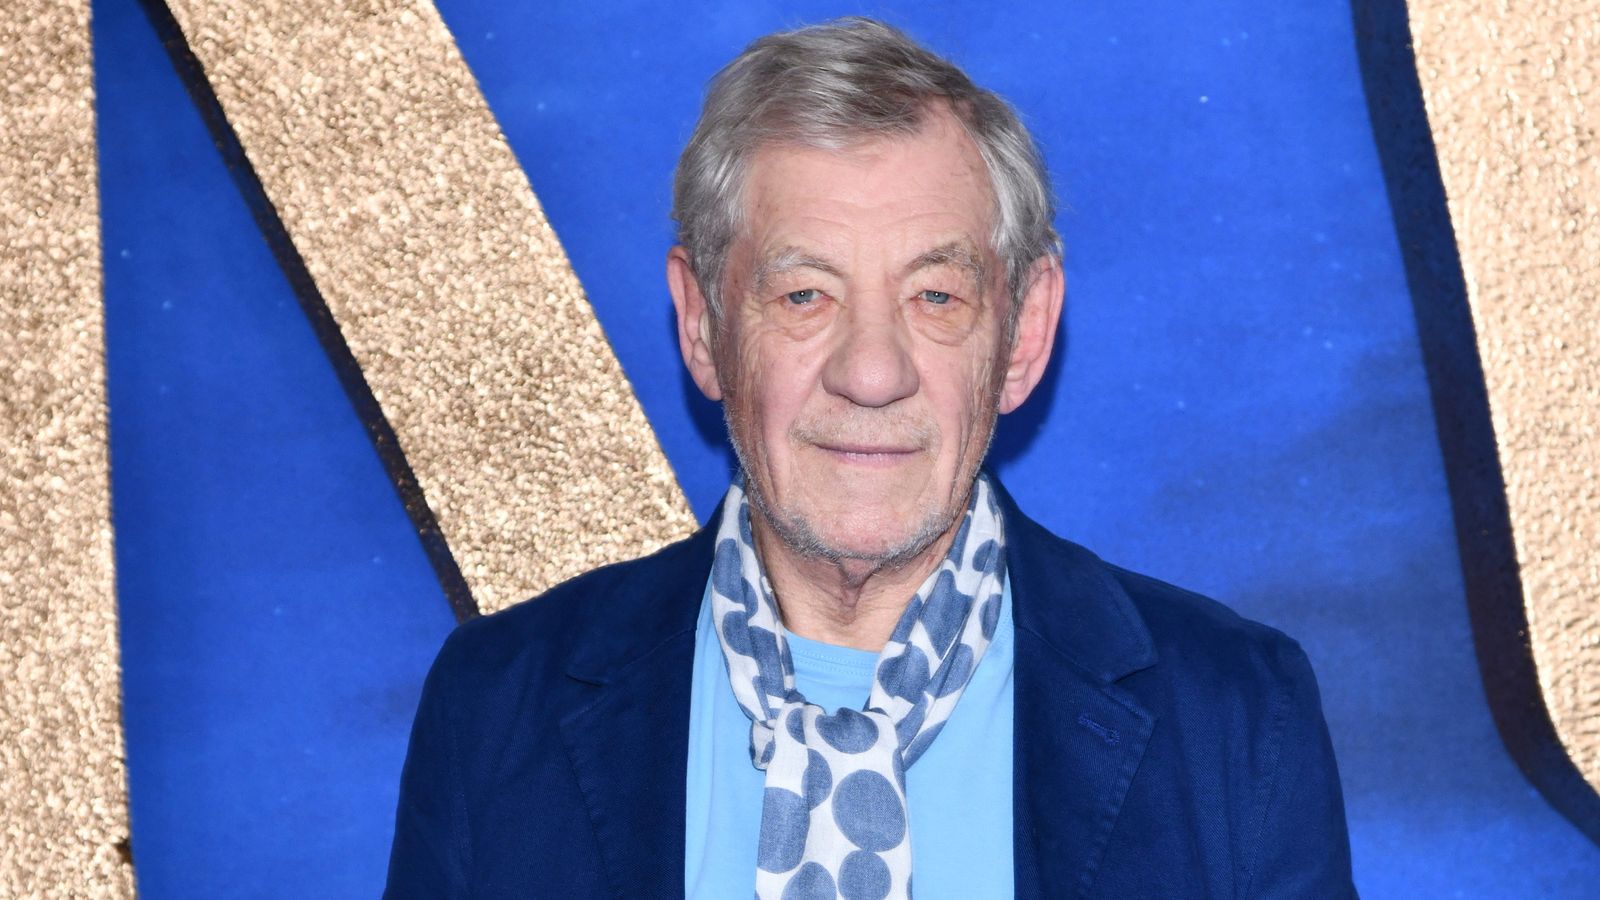 Sir Ian McKellen 'looking forward to returning to work' as he thanks NHS staff after on-stage fall